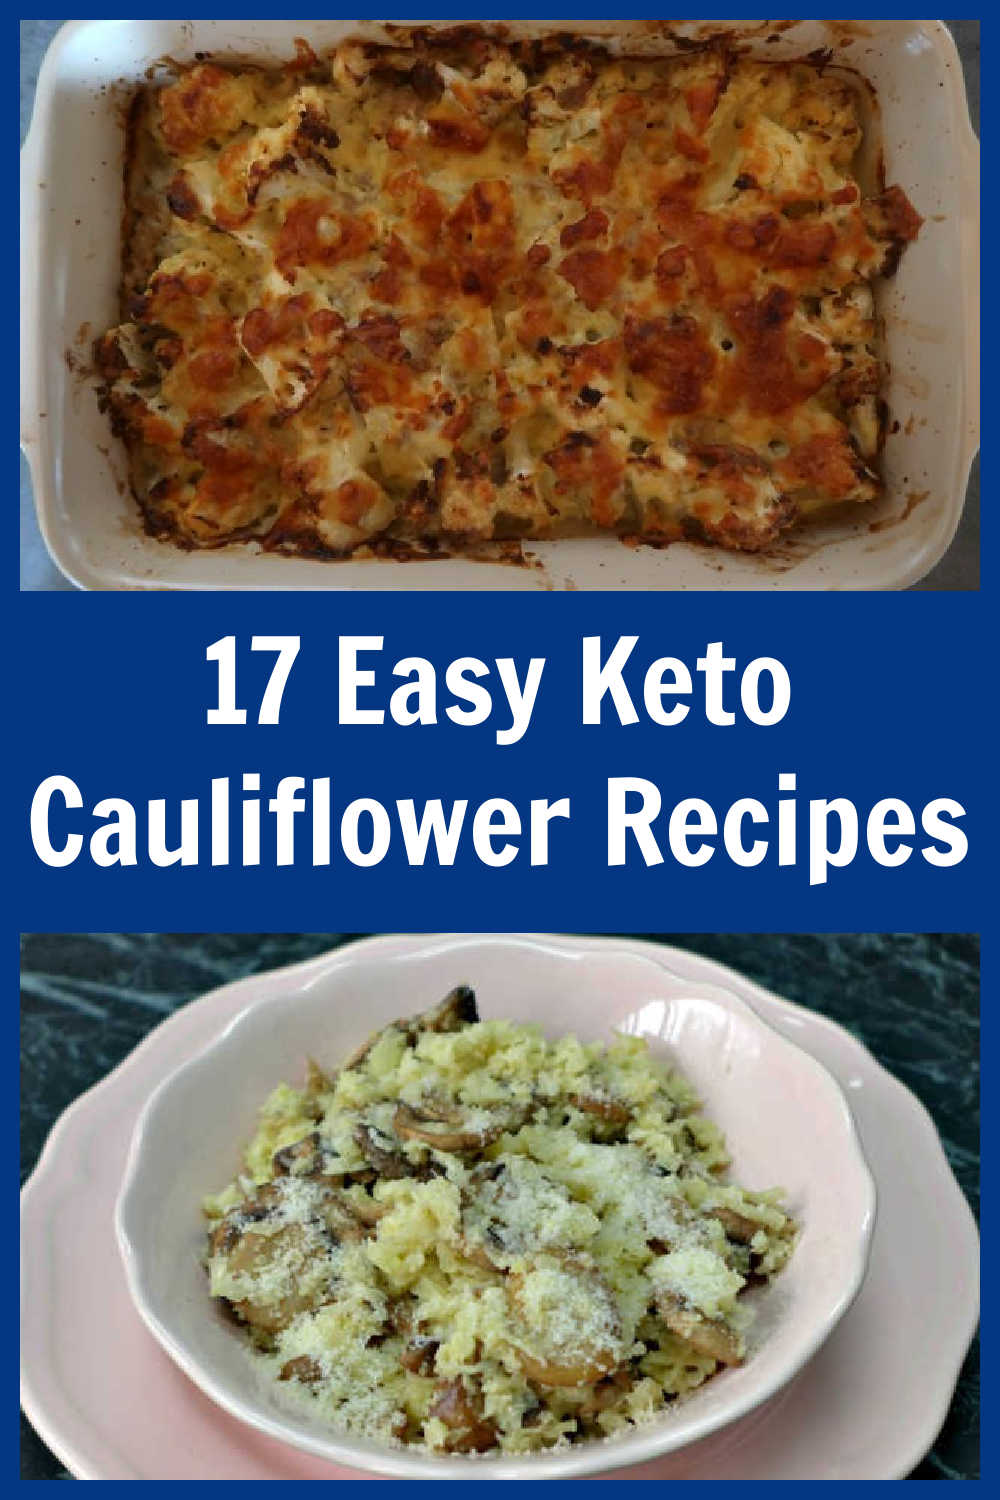 Keto Cauliflower Recipes - 17 Of The Best Easy Low Carb Friendly Meal Ideas - Including a Cheesy Loaded Casserole, Rice and Mash